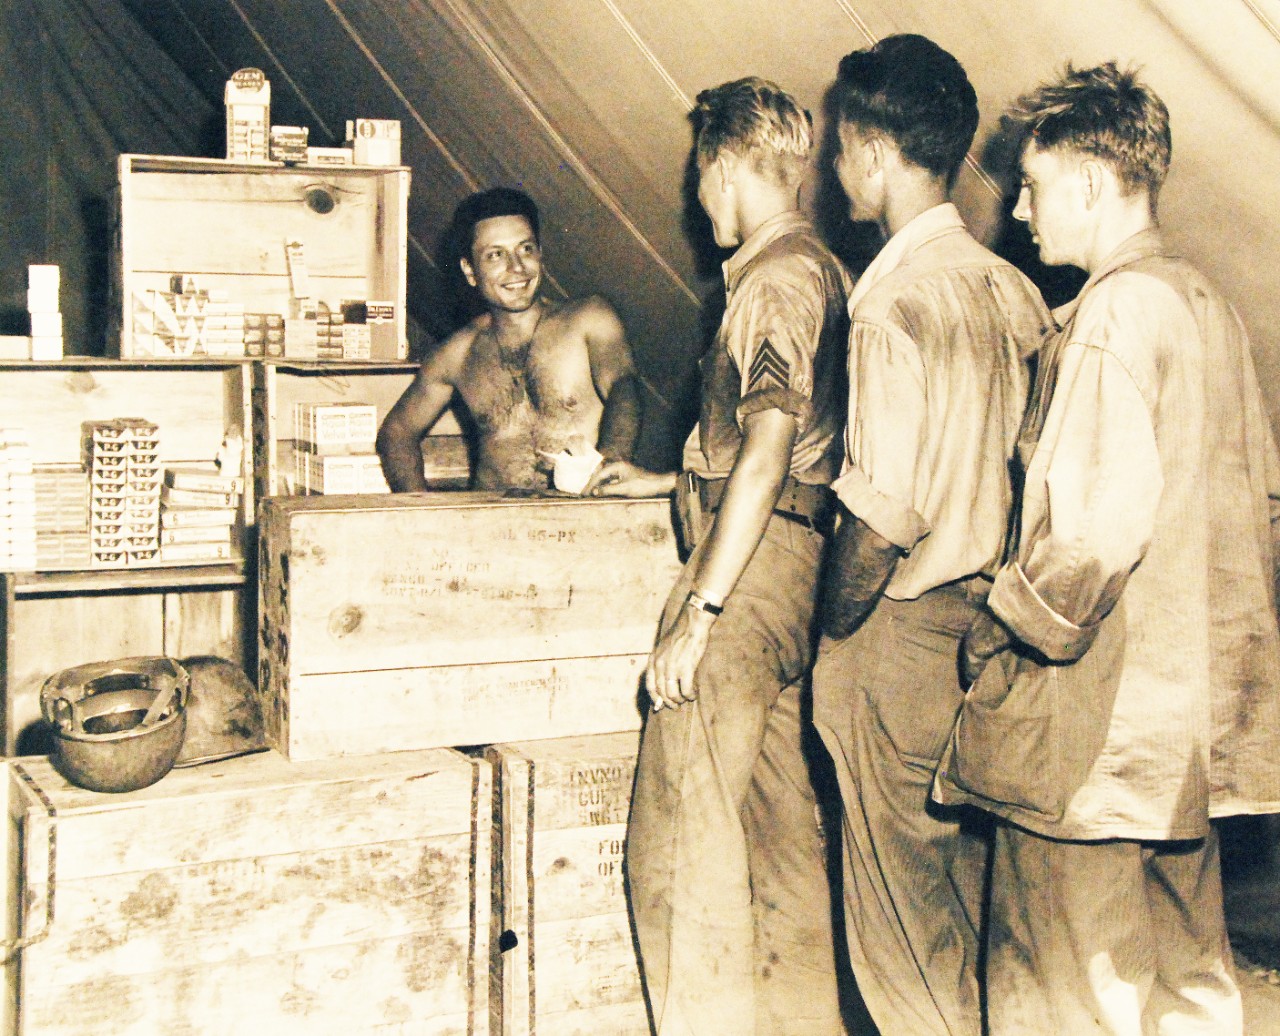 80-G-40266:  Guadalcanal Operation, August 1942-February 1943  In this tented store somewhere in the Pacific, U.S. Marine fighters buy razor blades, soap, shaving accessories, and toothpaste, all made in the U.S.A., January 11, 1943.   Possibly Guadalcanal.   U.S. Navy Photograph, now in the collections of the National Archives (2015/10/20).